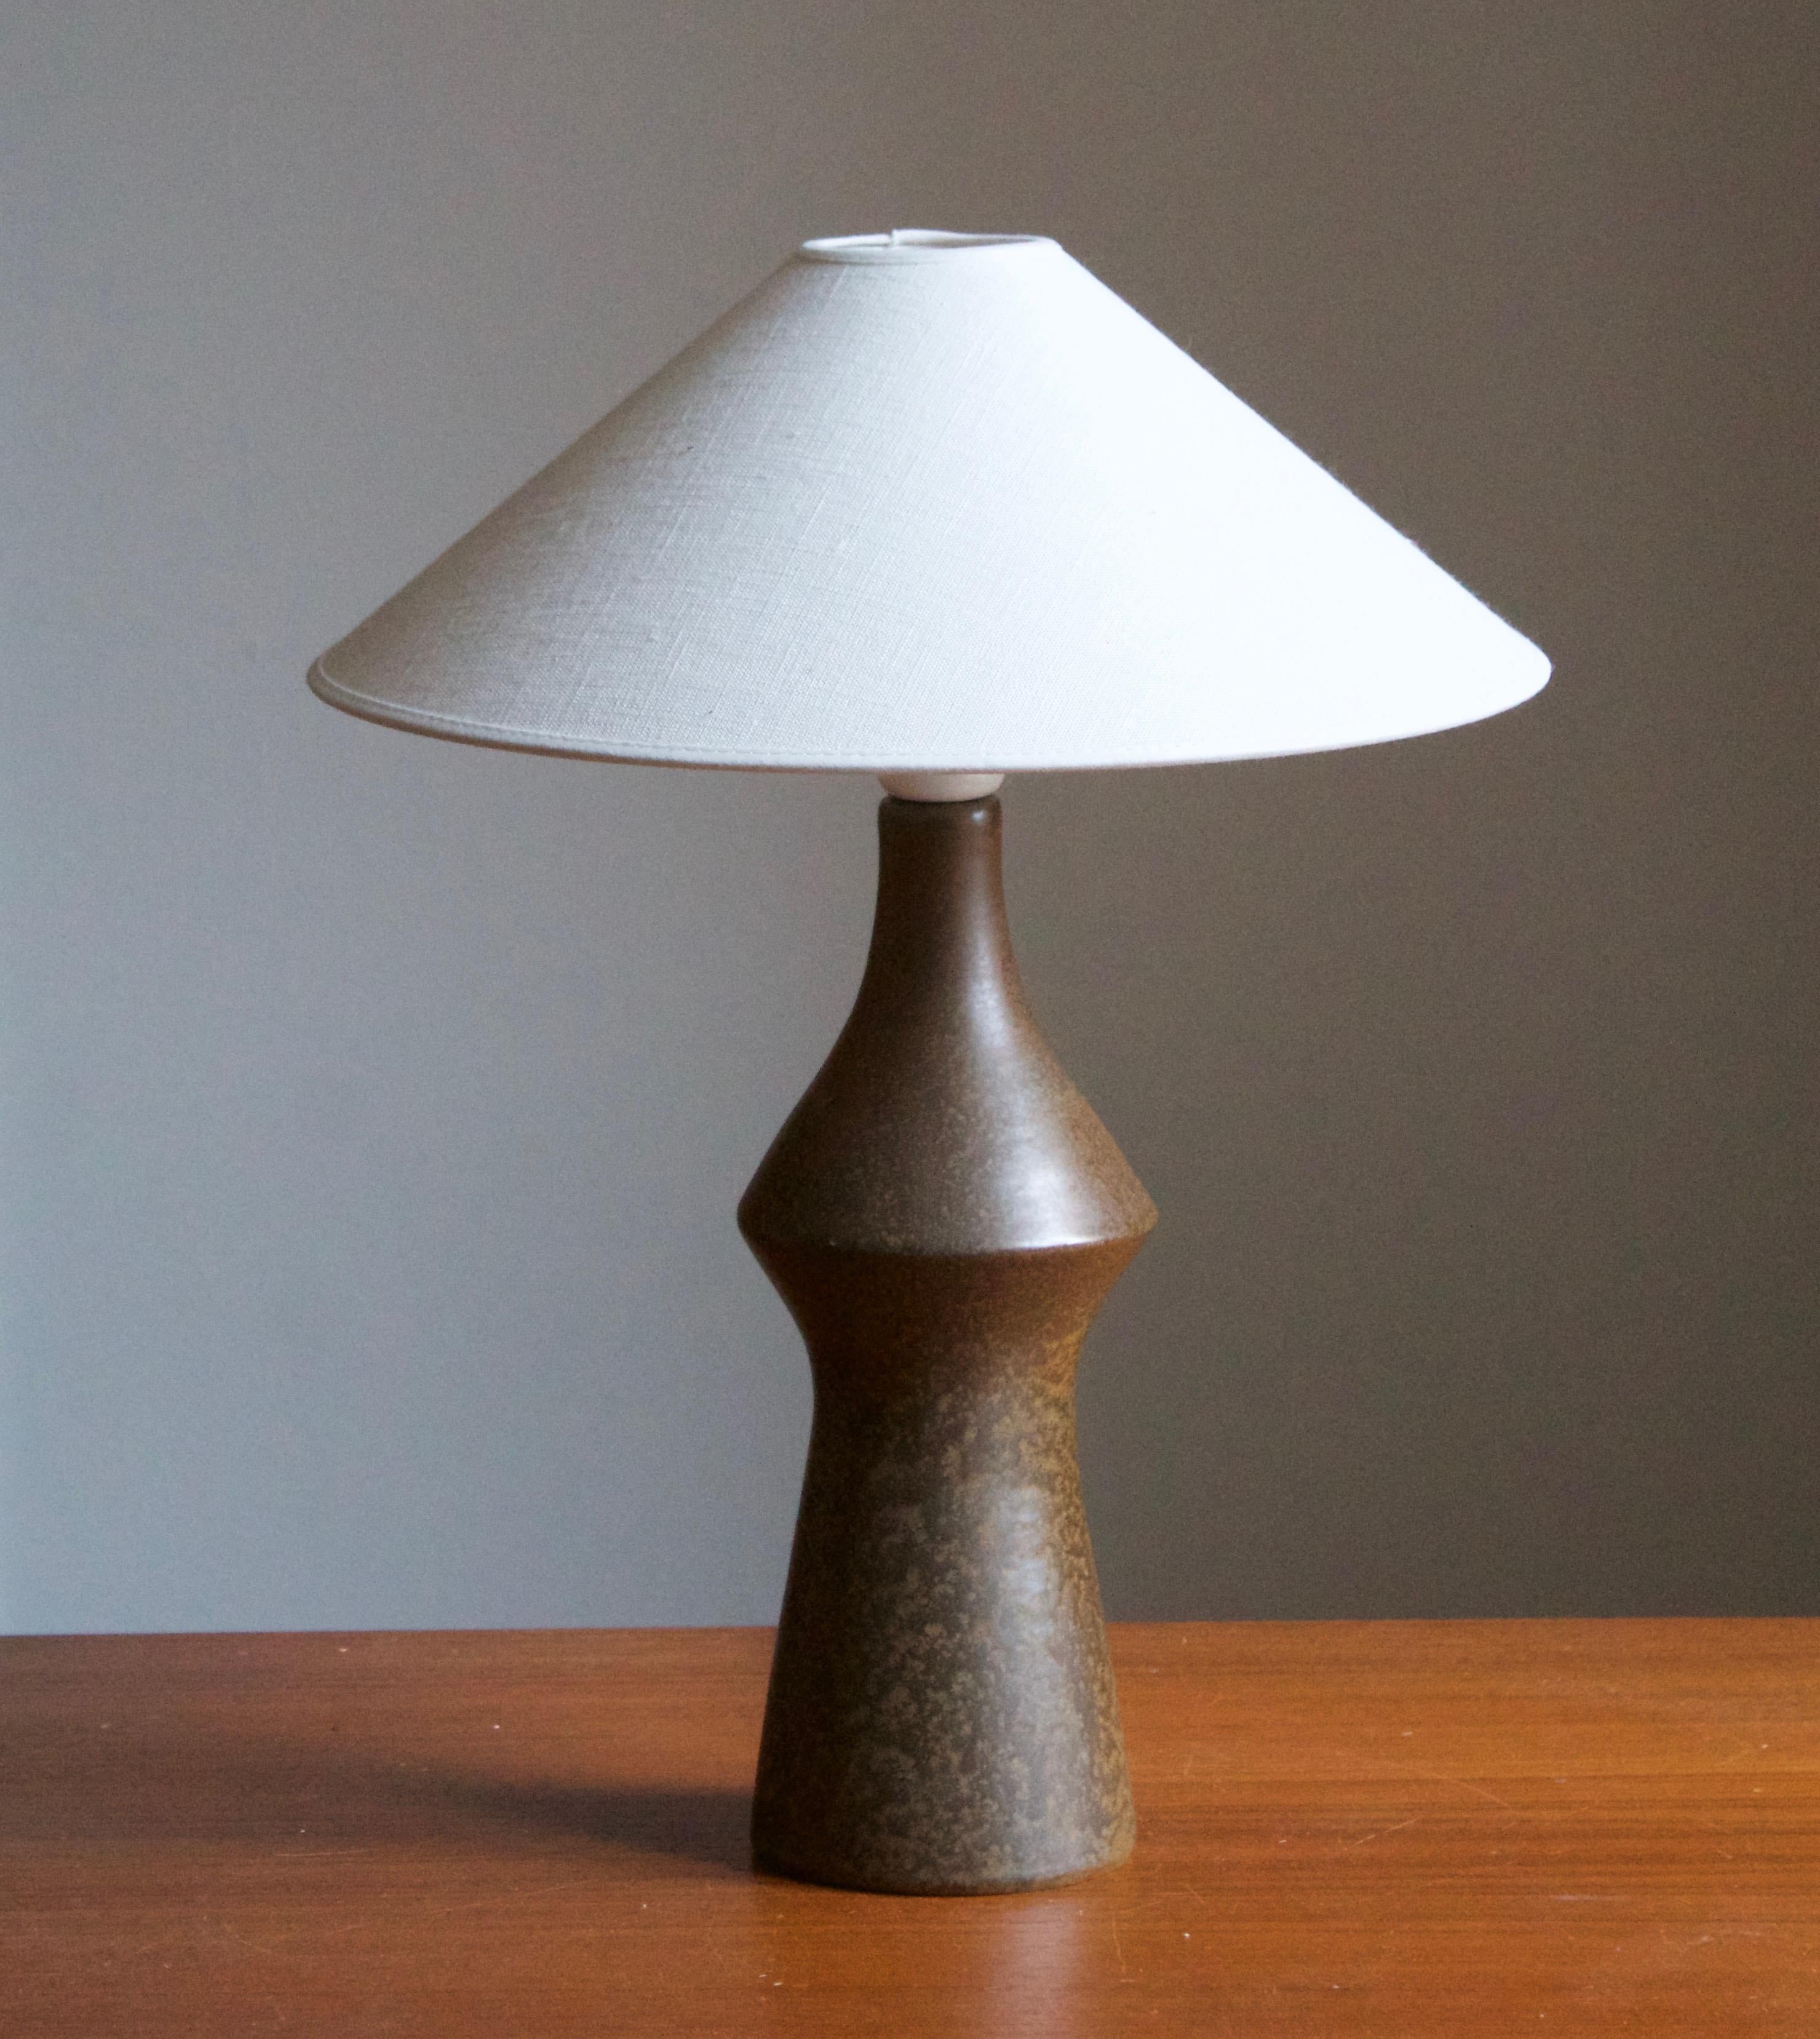 A table lamp. In glazed stoneware. Unmarked.

Stated dimensions exclude lampshade. Height includes socket. Sold without lampshade.